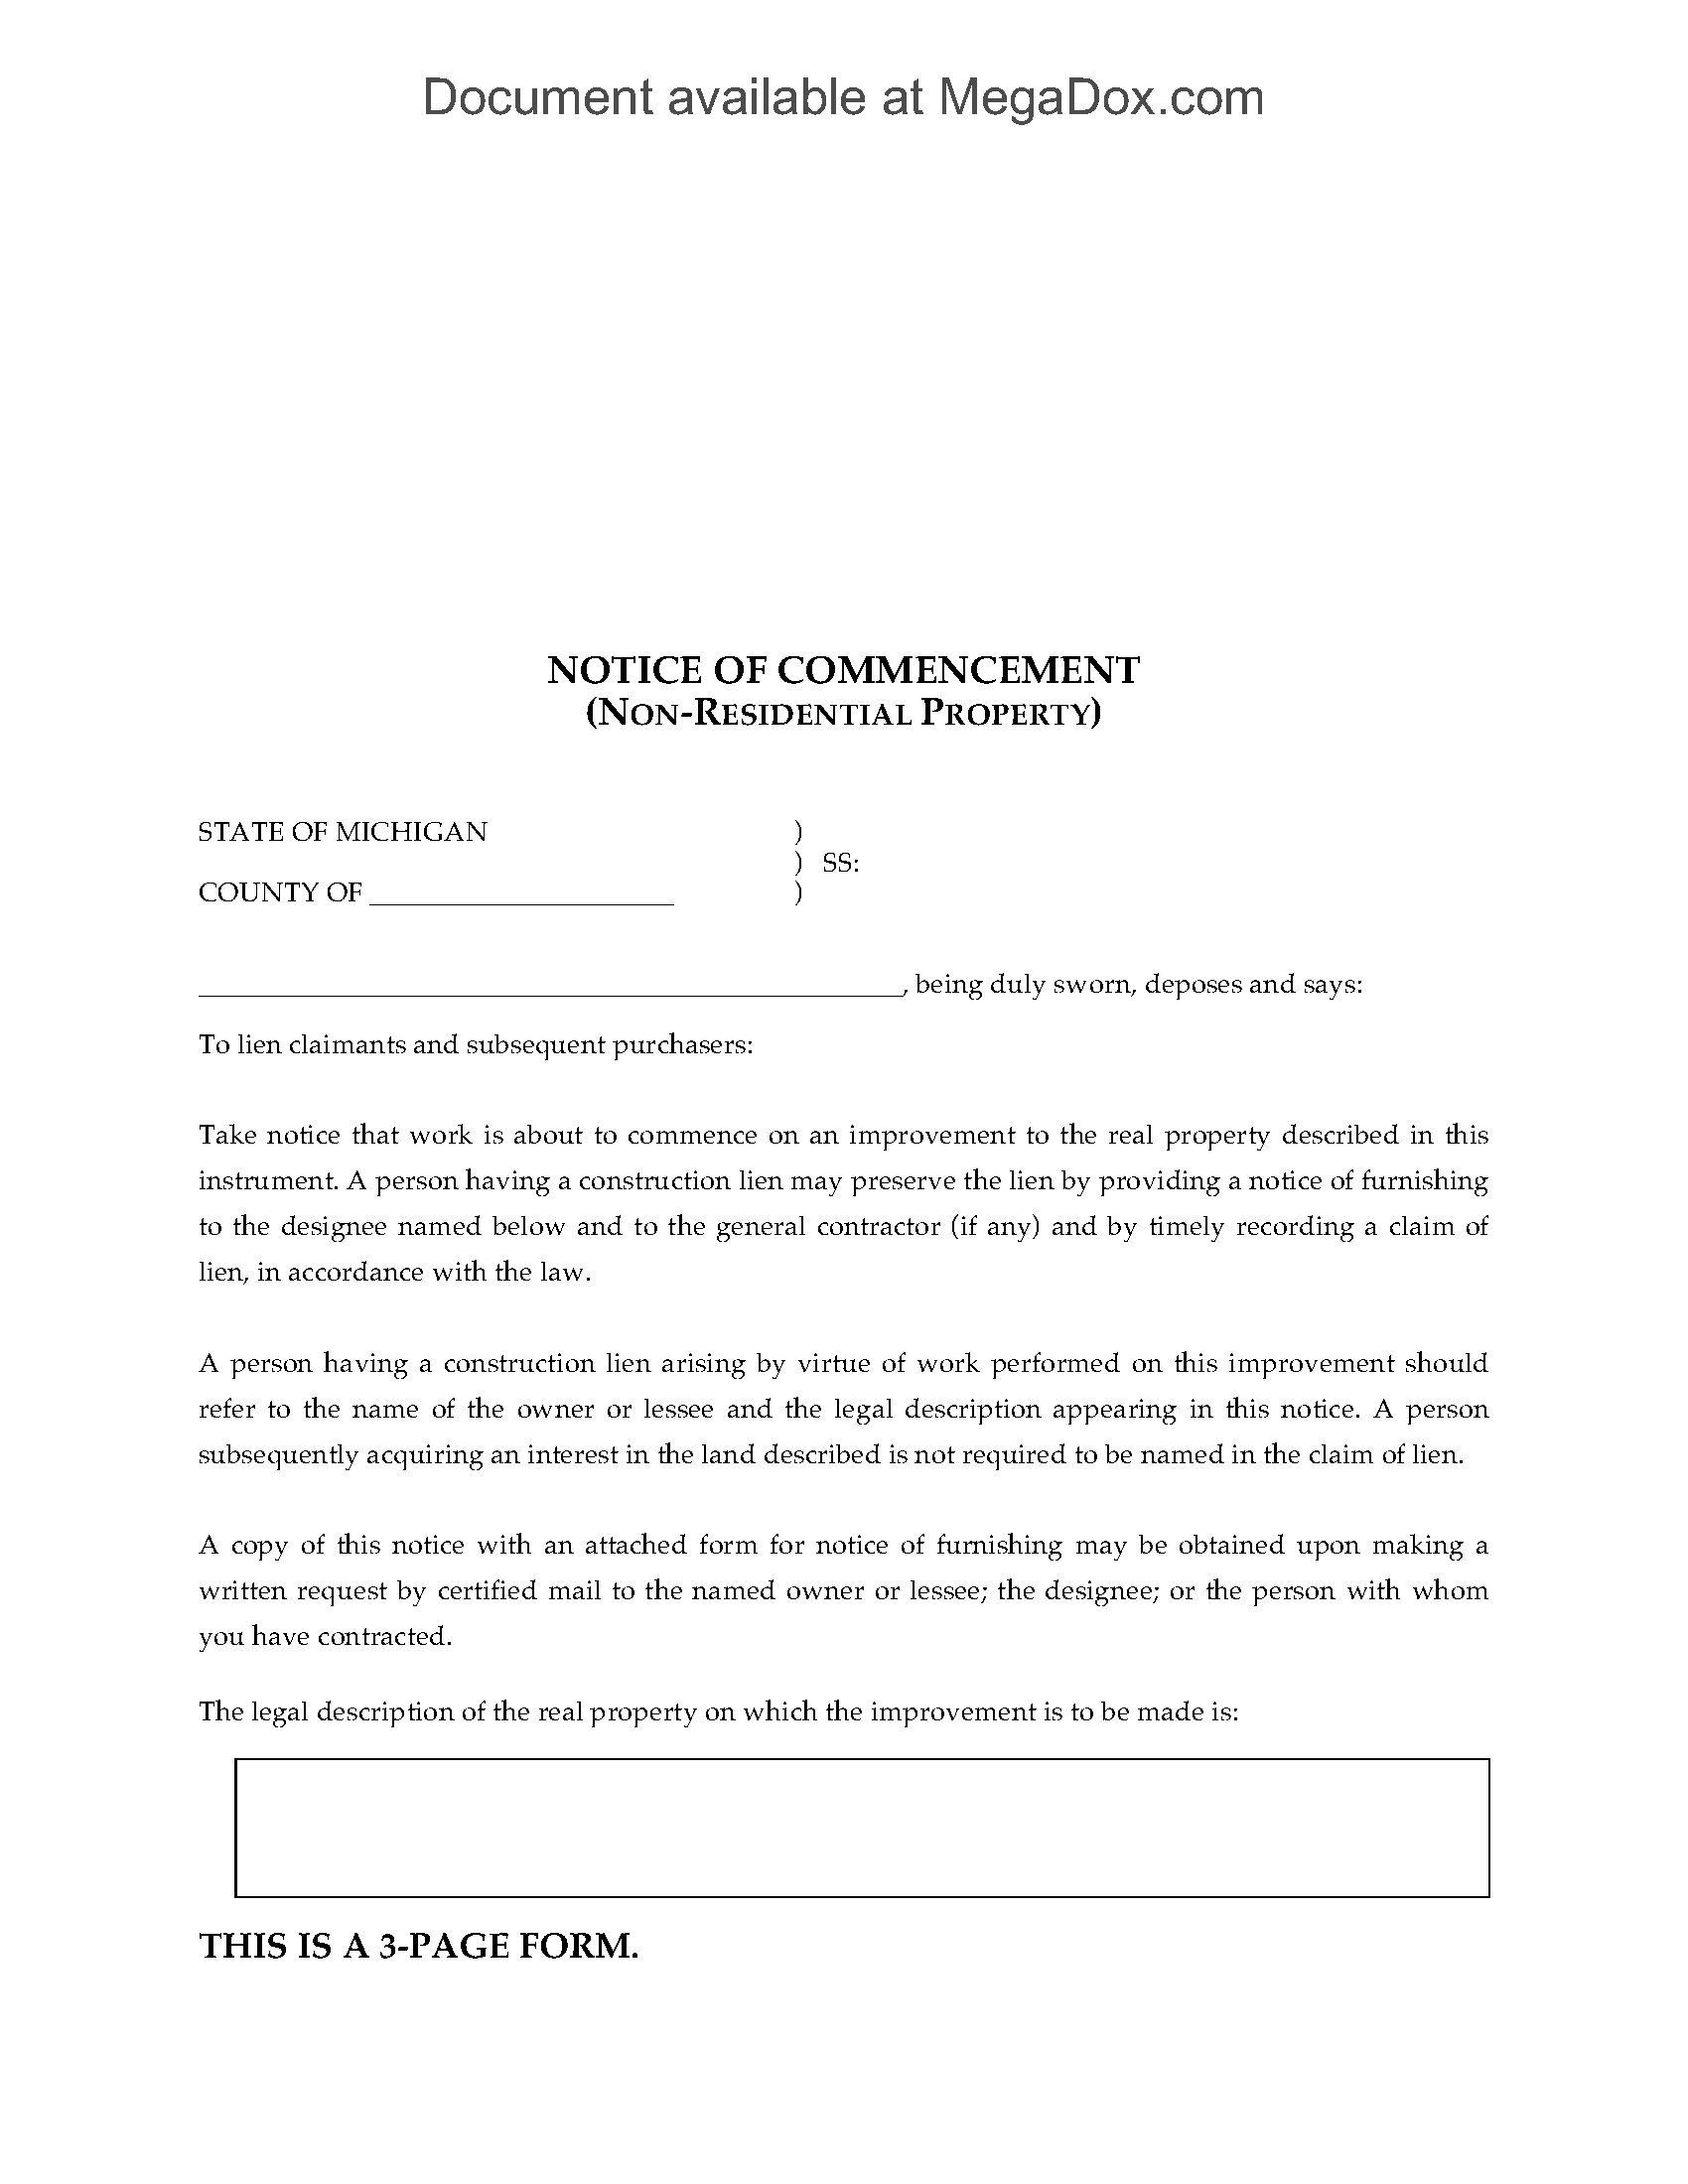 michigan-notice-of-commencement-non-residential-property-legal